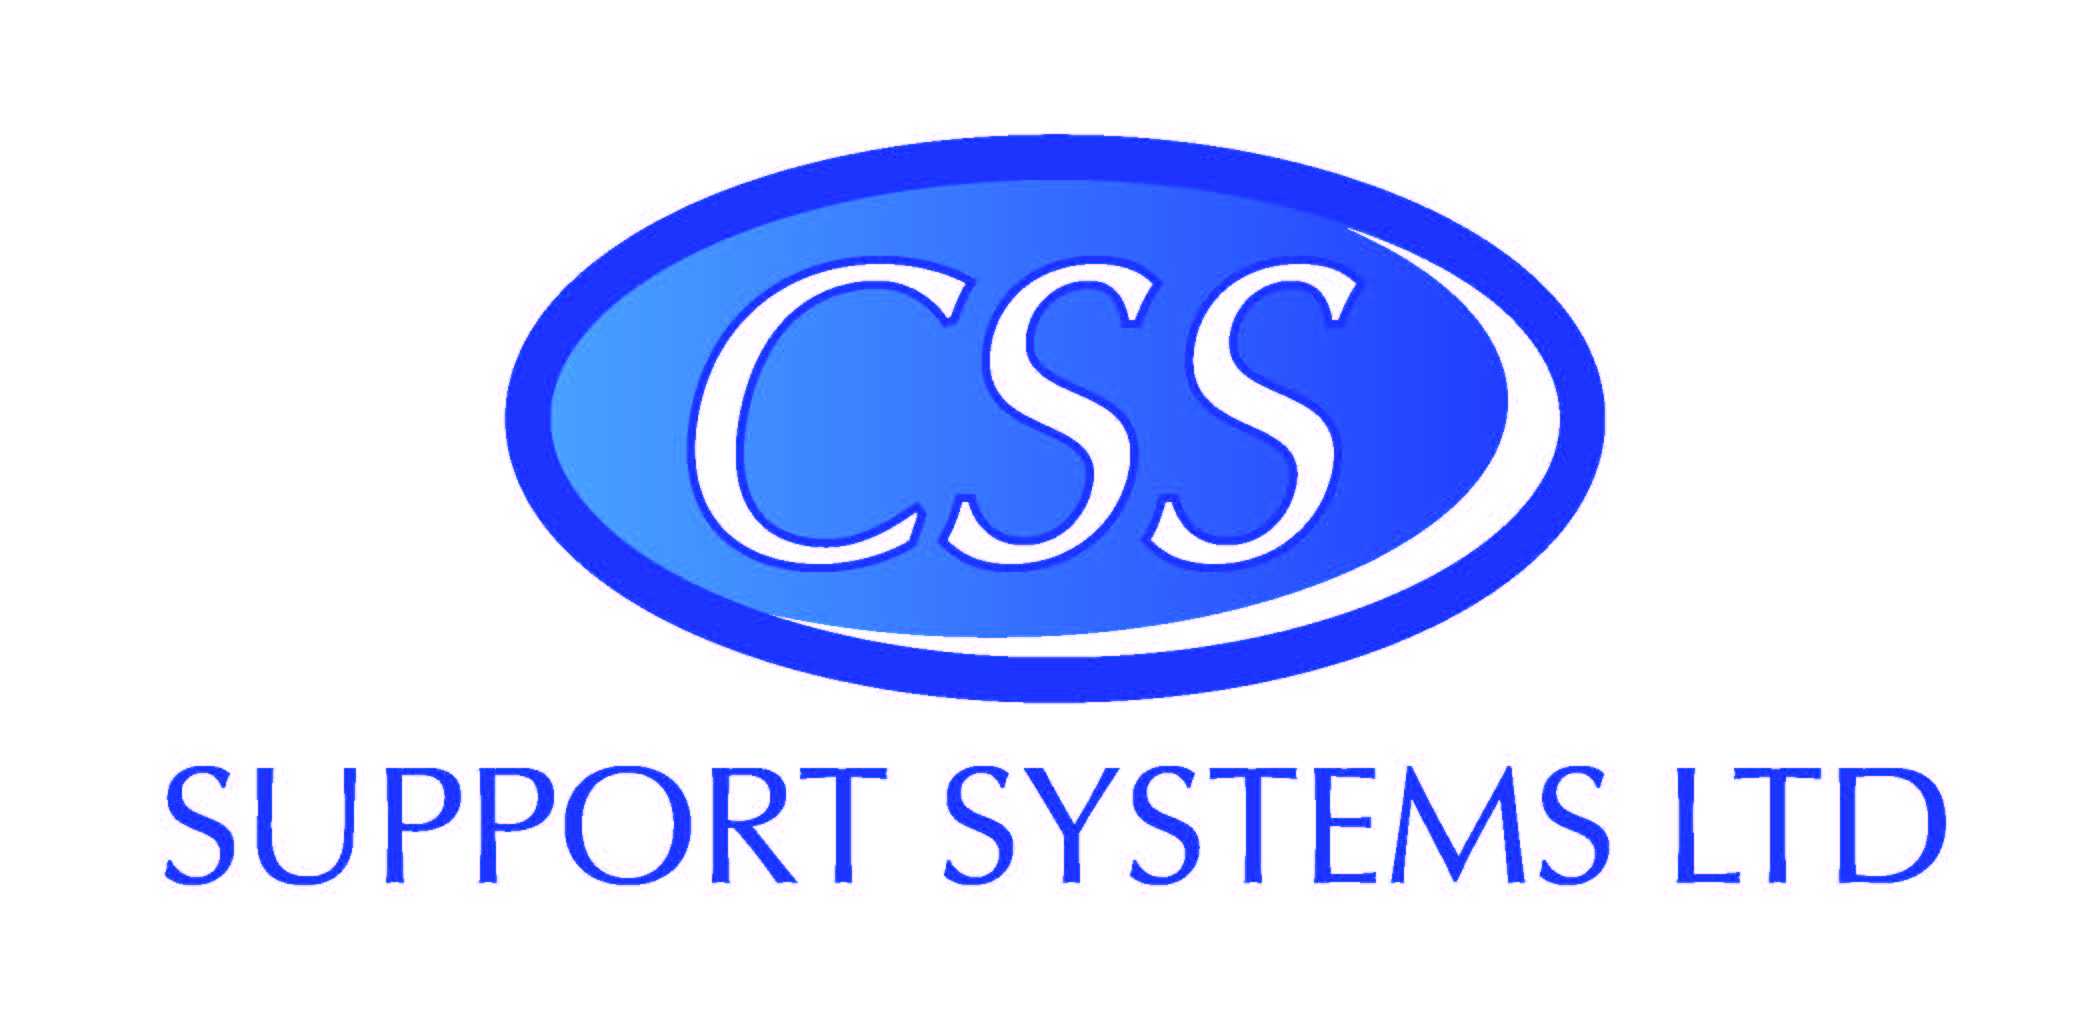 CSS LIMITED